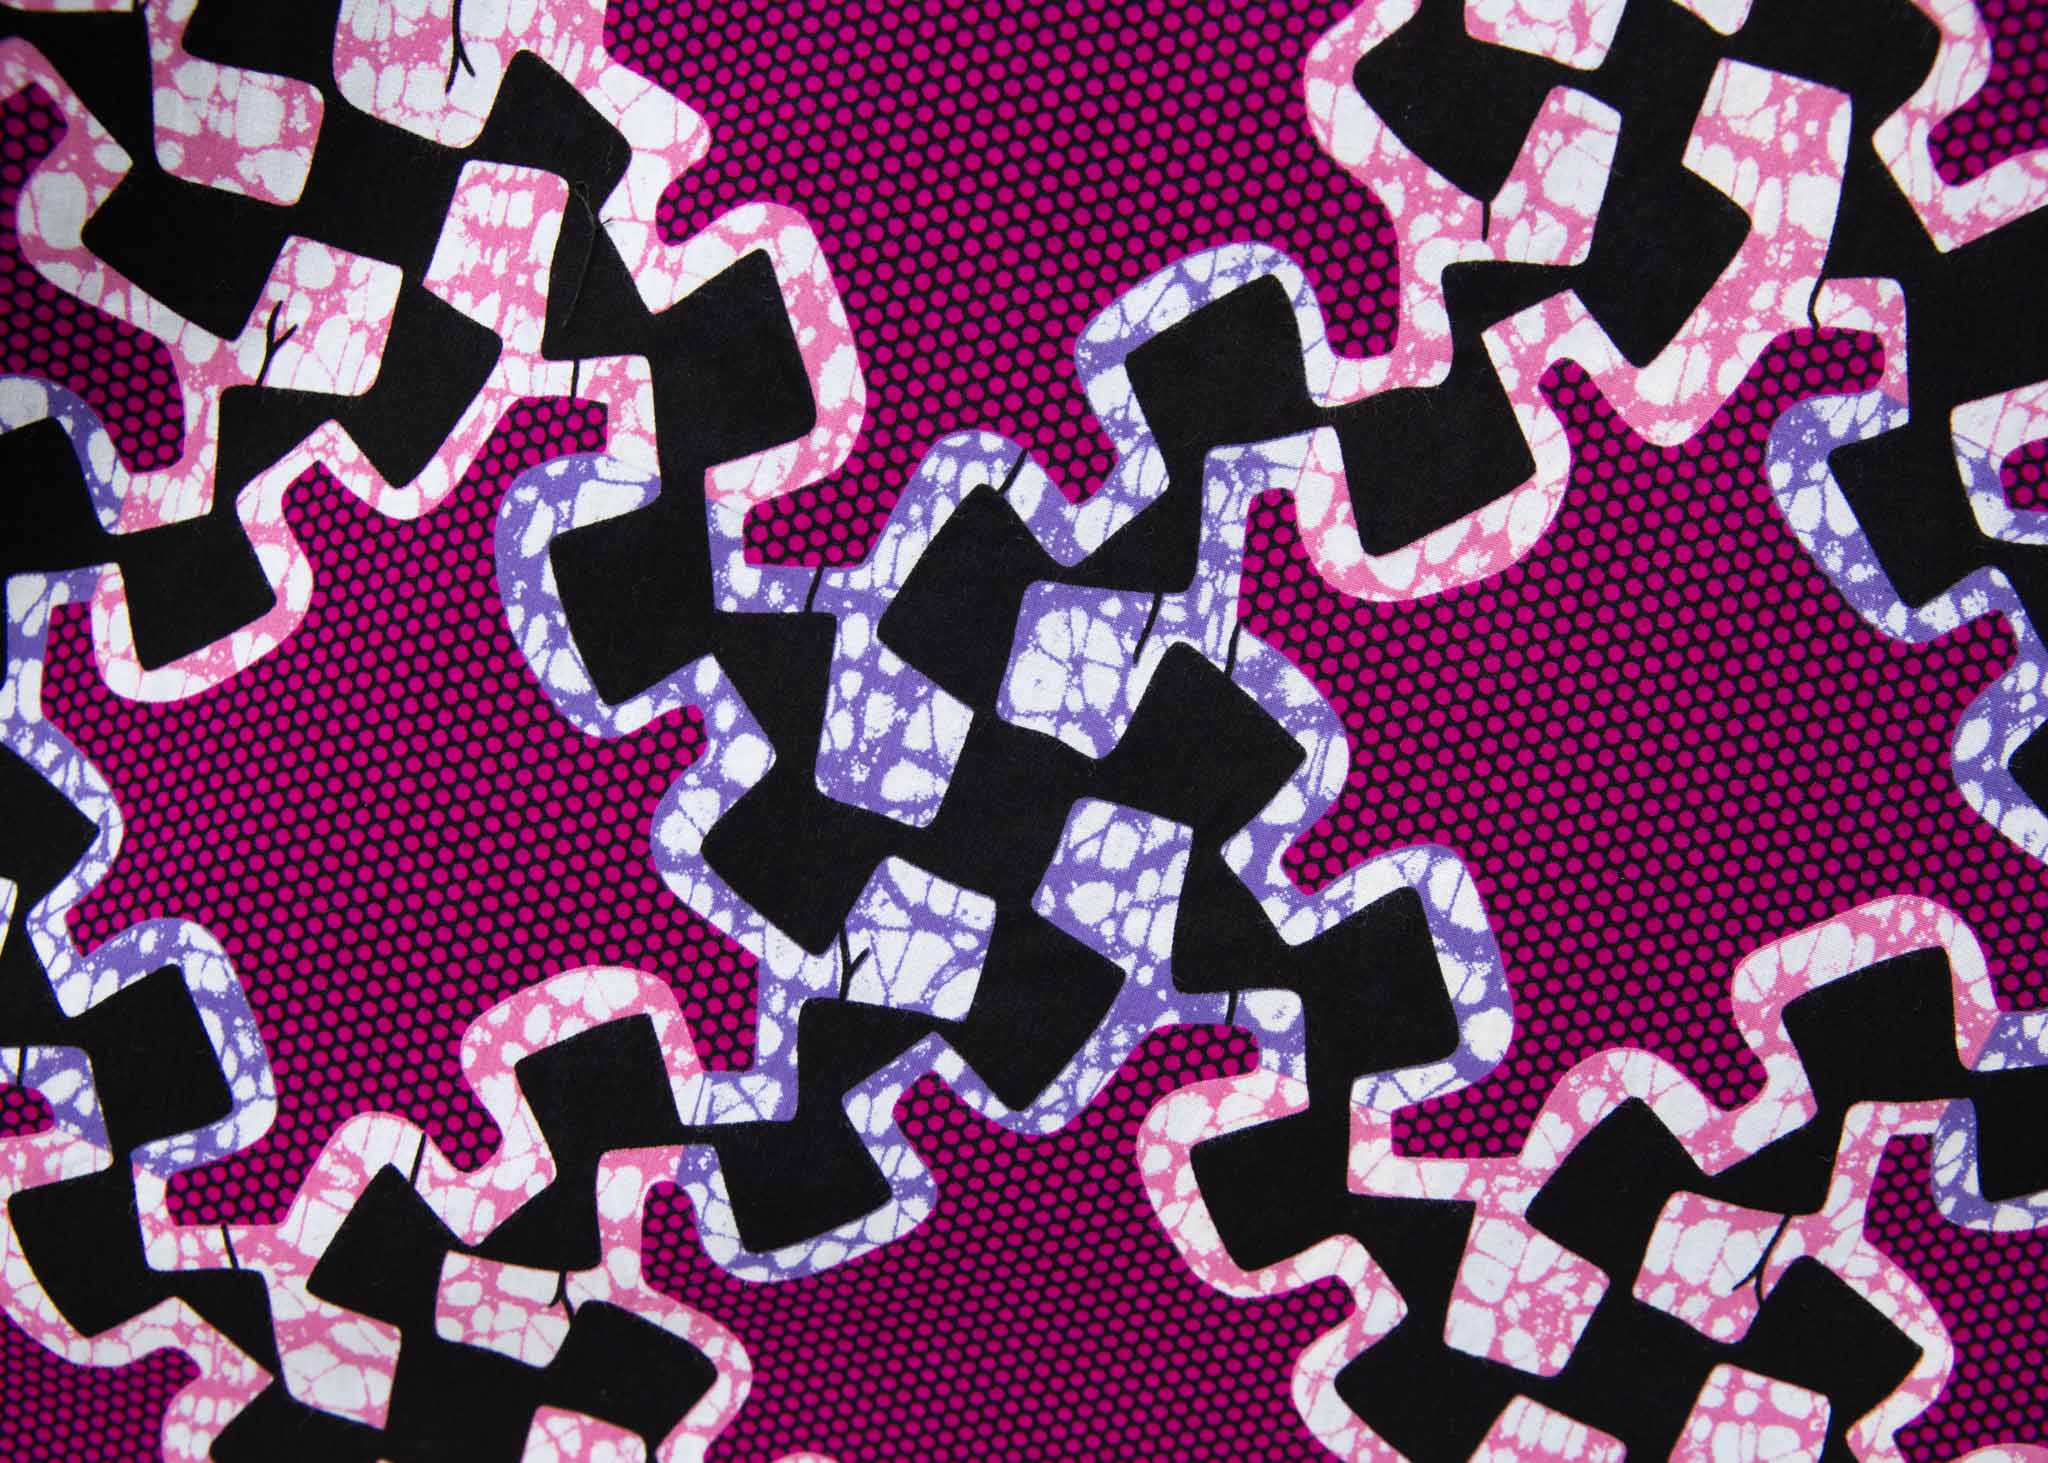 Display of purple dress with black and white puzzle print.